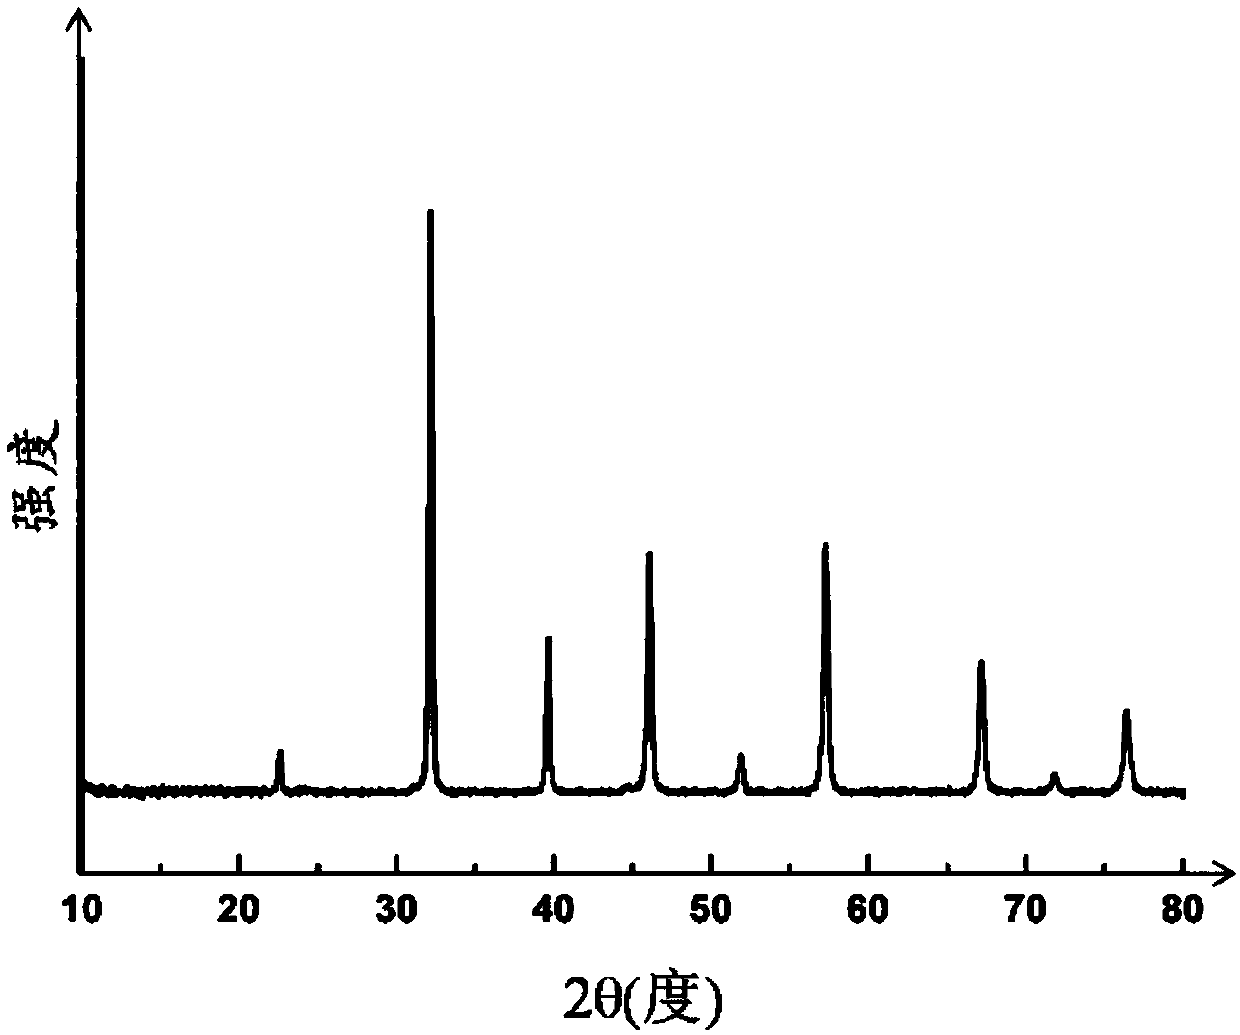 Barium strontium titanate dielectric material for microwave tuning device